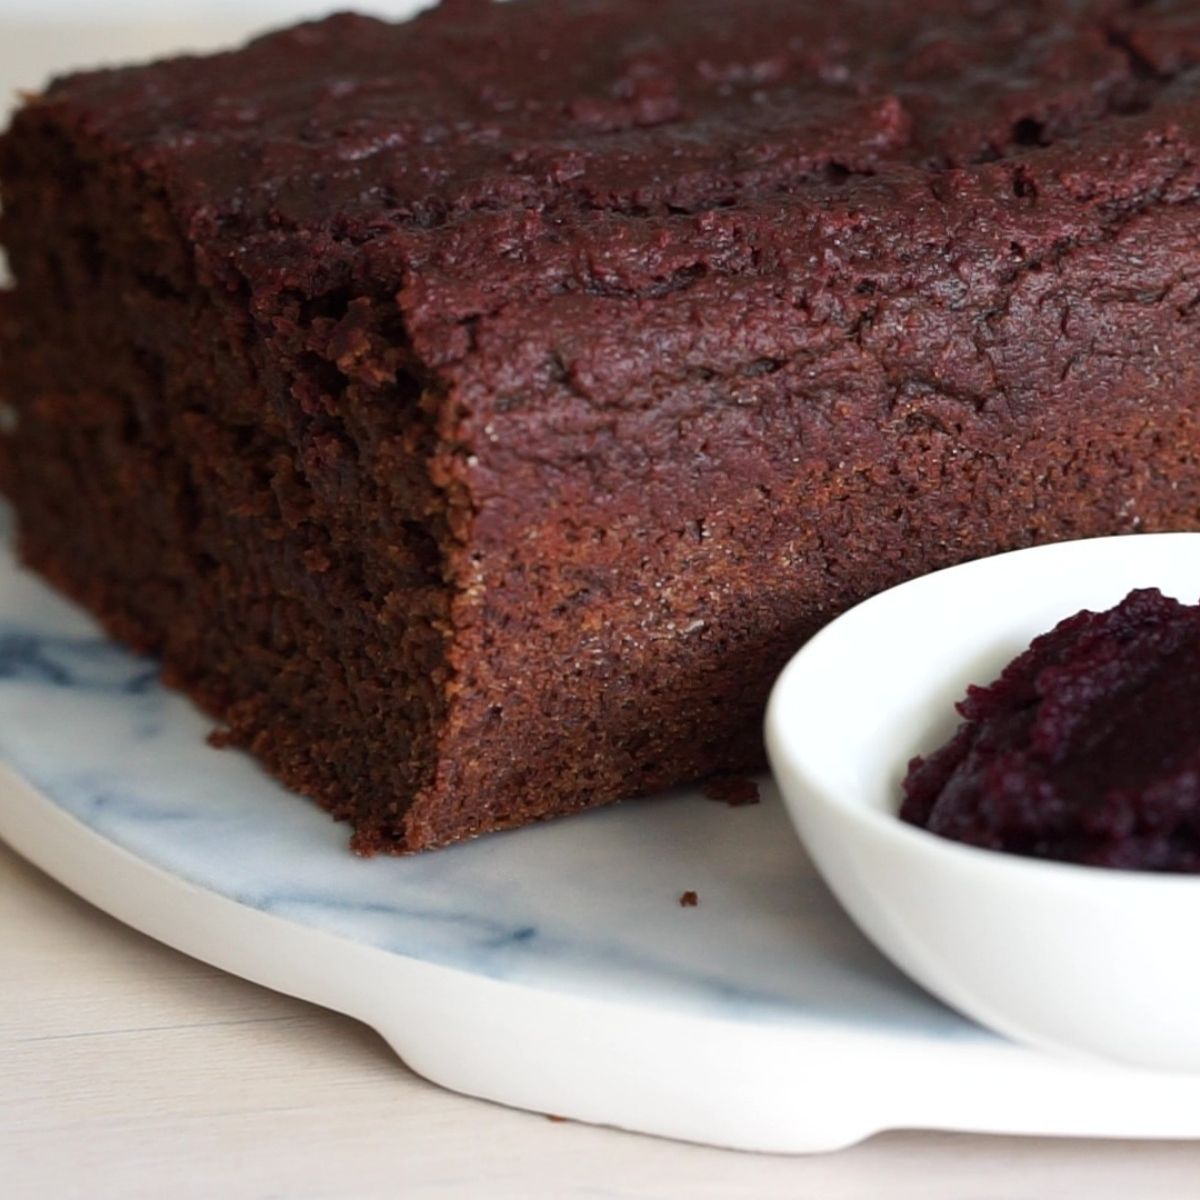 Healthy beetroot chocolate cake - The clever meal